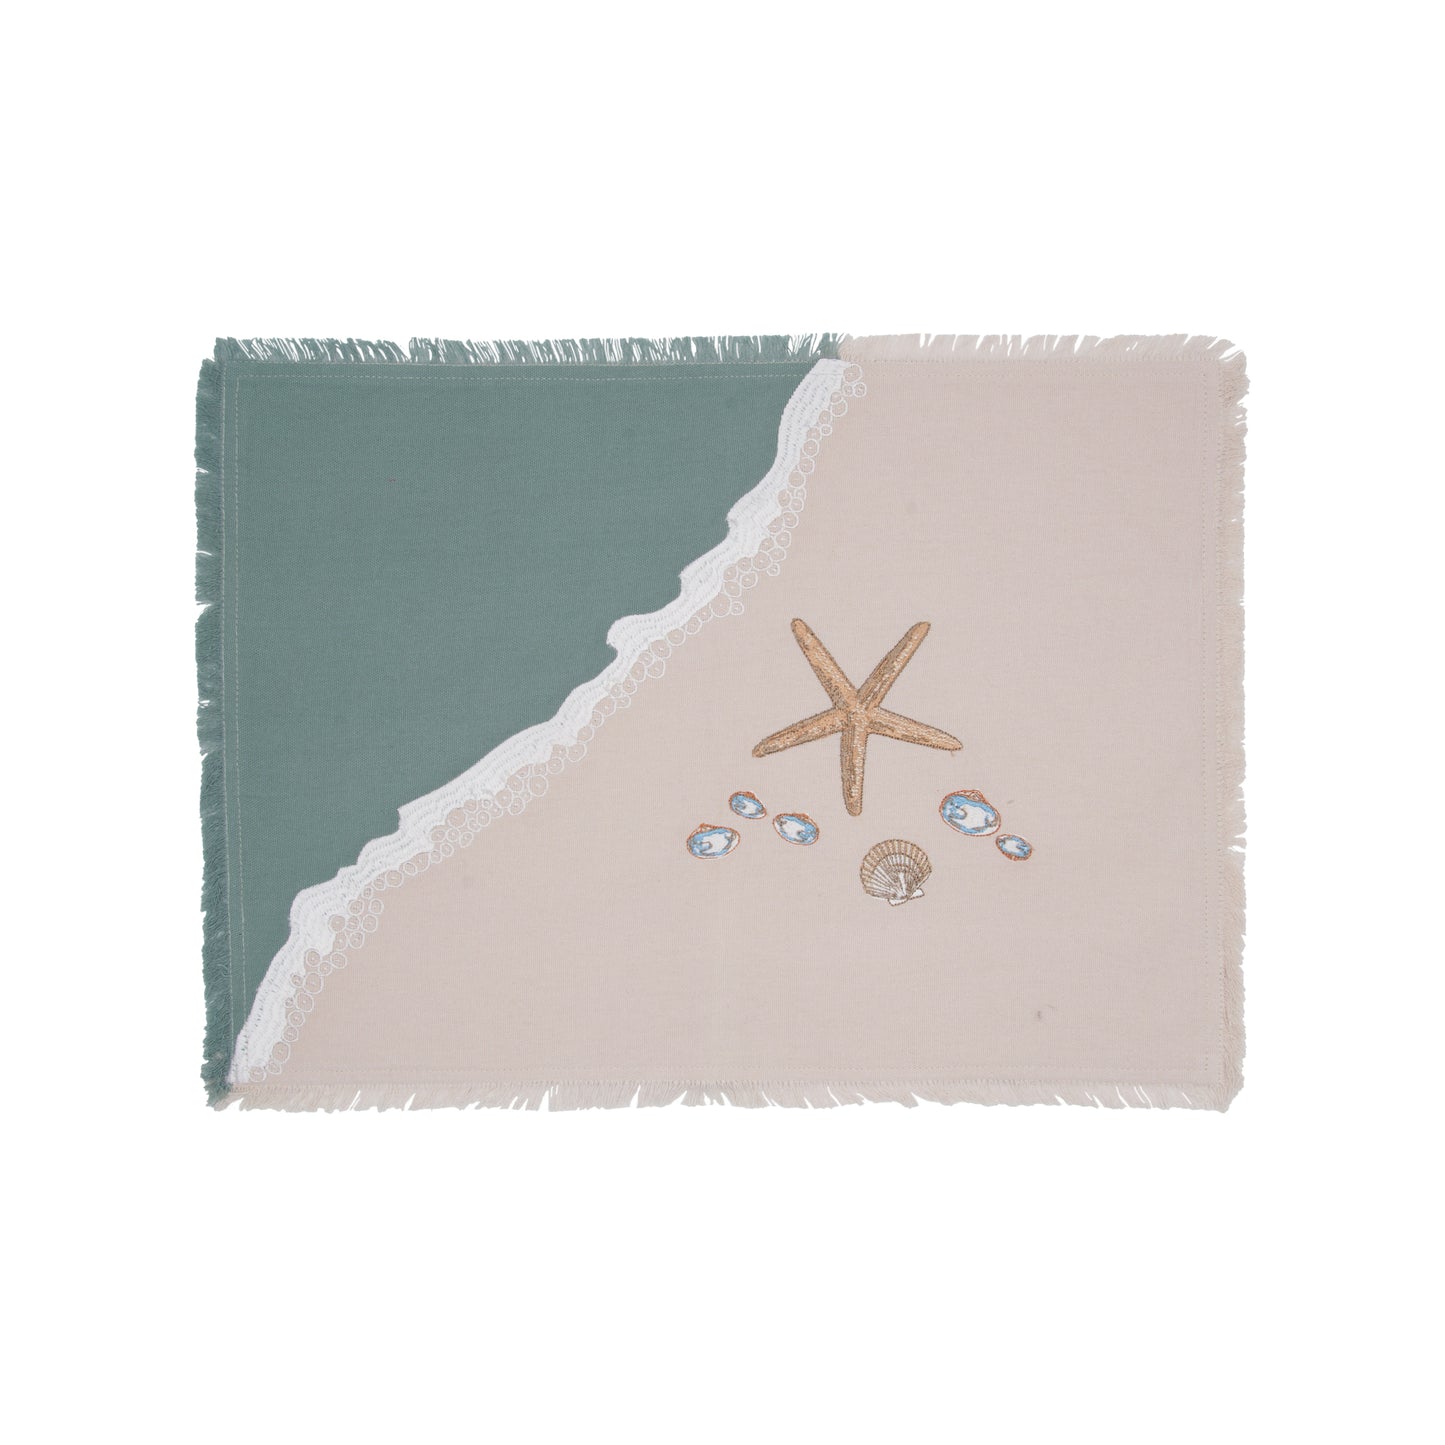 Sea stars and sea shells embroidered on a cotton and placemat featuring a wave washing onto the beach, finished with fringe edges.